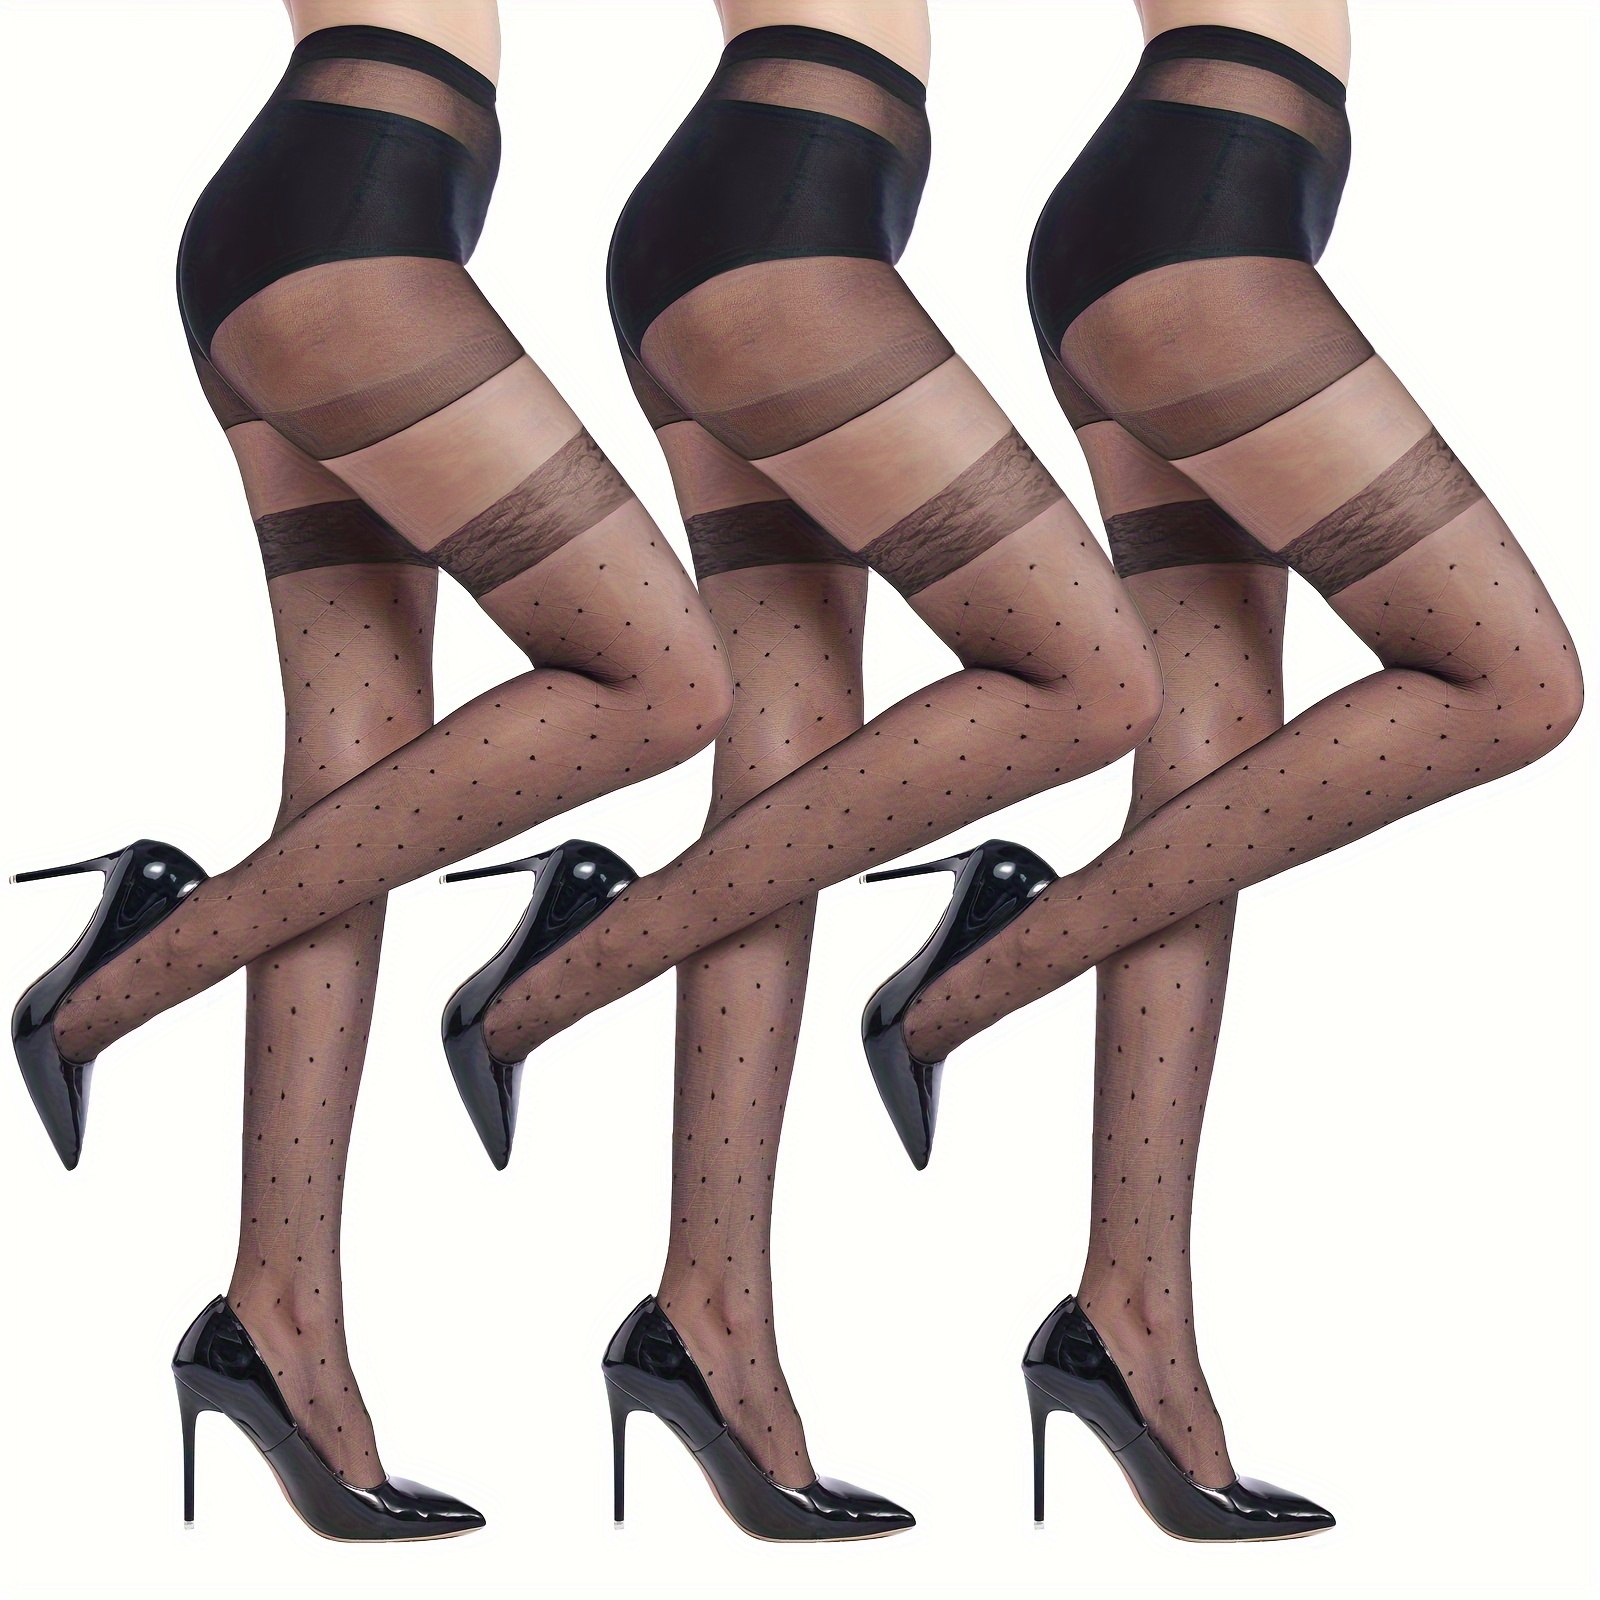 3 Pairs Black Sheer Tights, Control Top High * Footed Pantyhose, Women's  Stockings & Hosiery